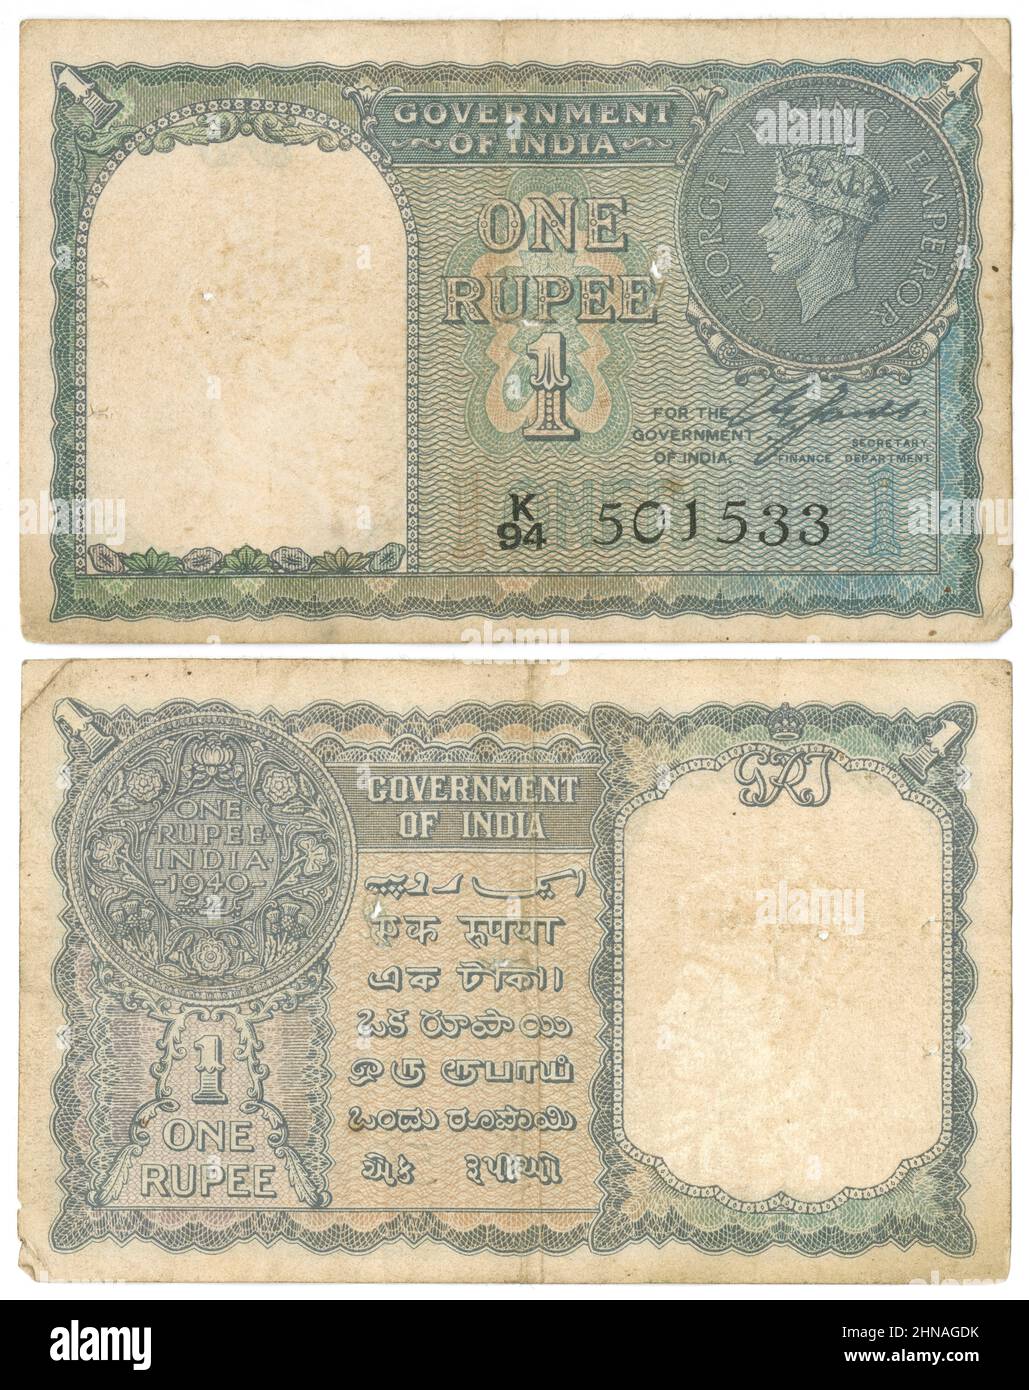 1940, One Rupee note, India, obverse and reverse. Actual size: 101mm x 63mm. Stock Photo